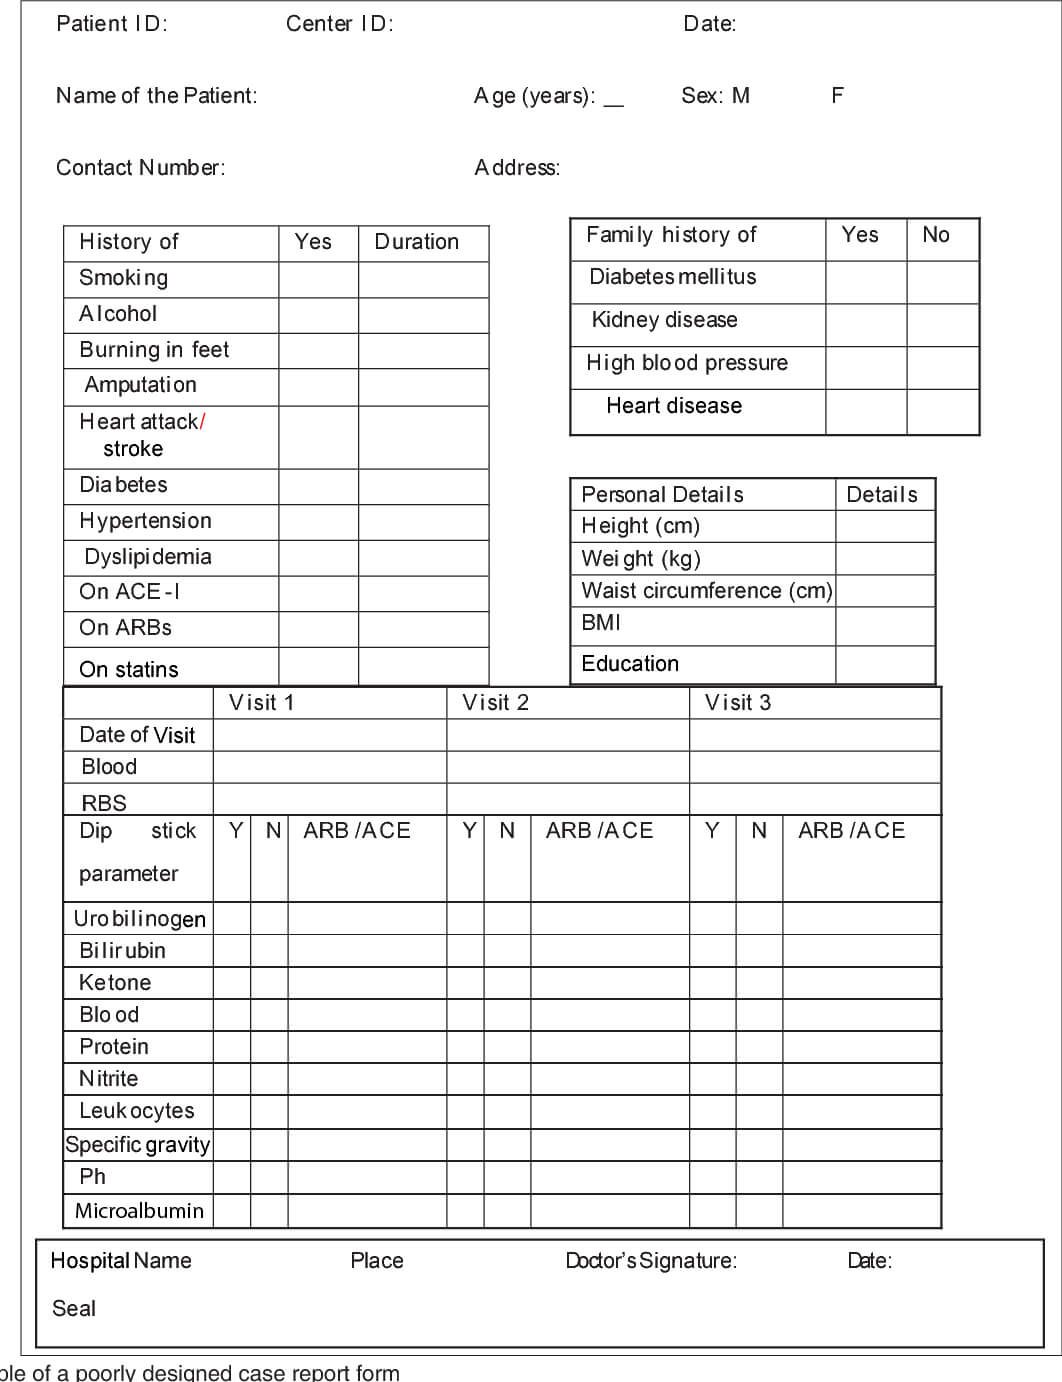 Basics Of Case Report Form Designing In Clinical Research Regarding Case Report Form Template Clinical Trials